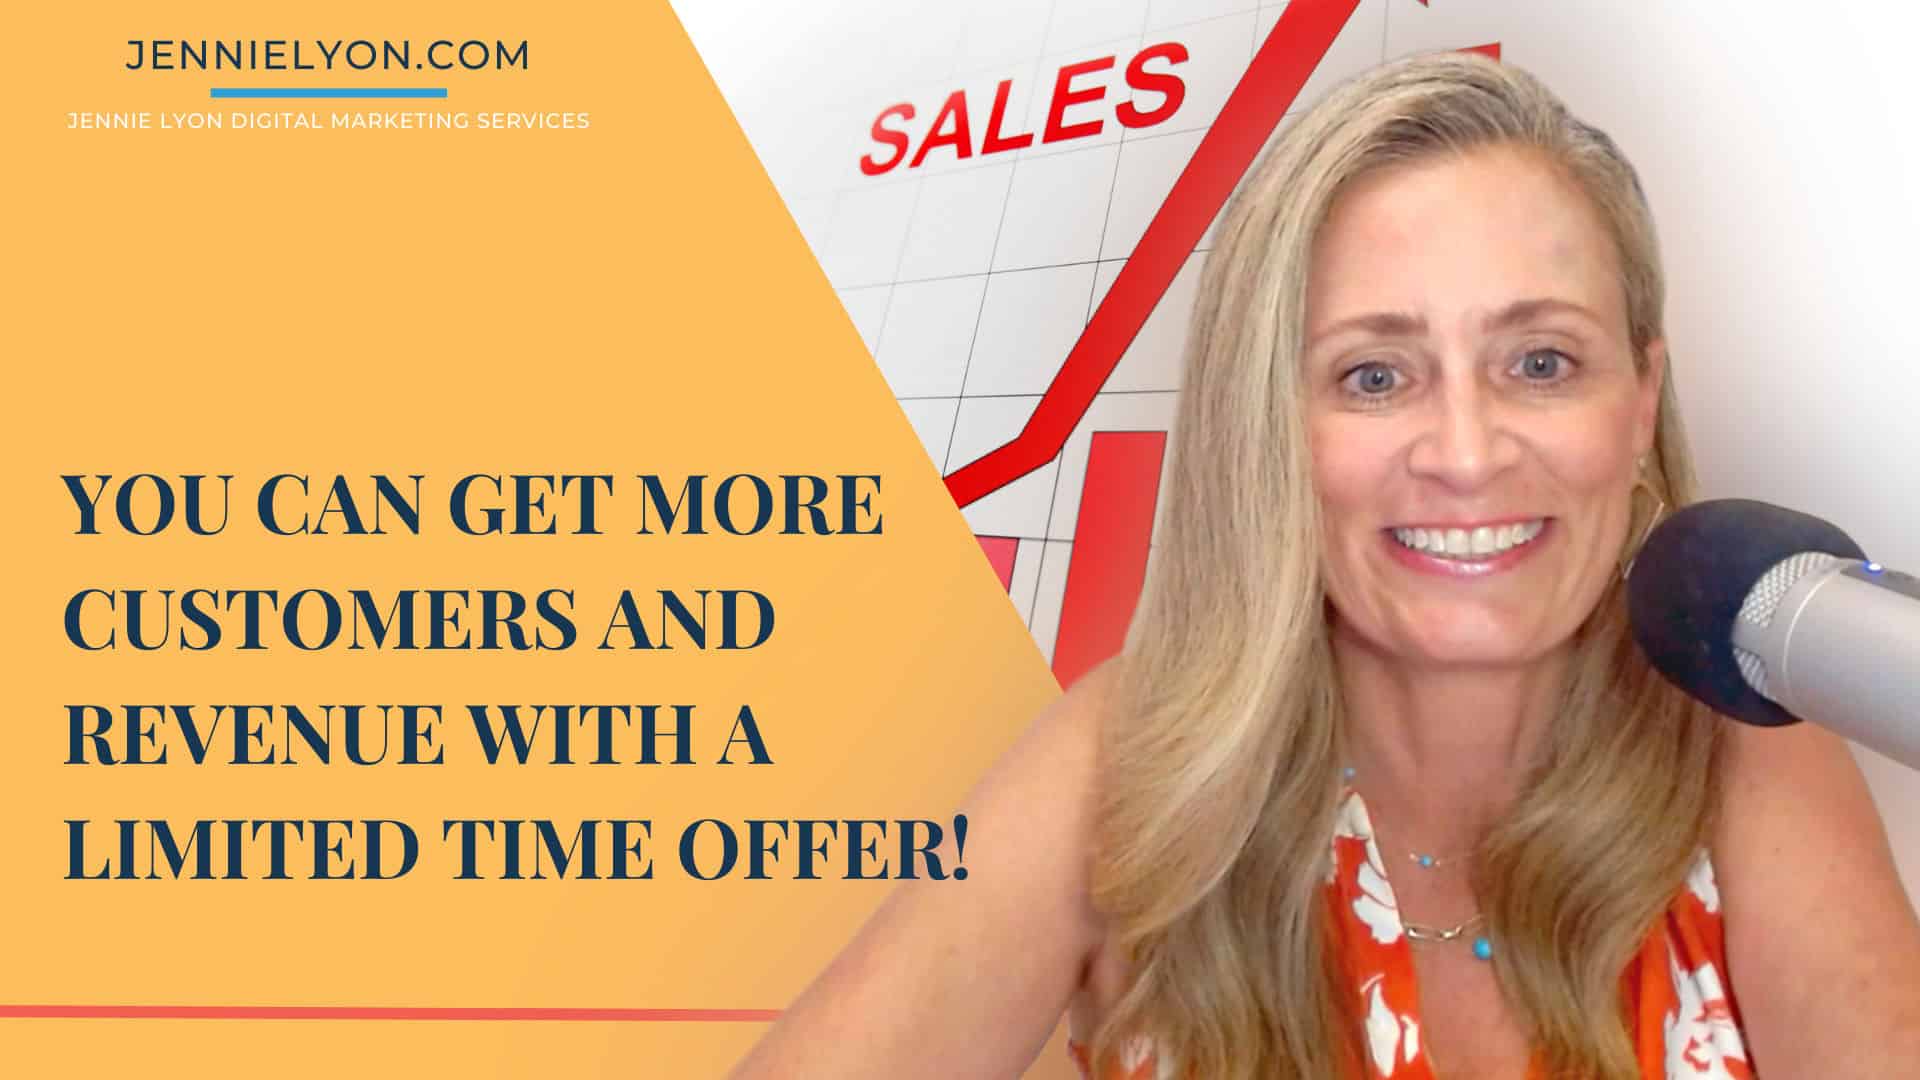 You Can Get More Customers and Revenue with a Limited Time Offer!